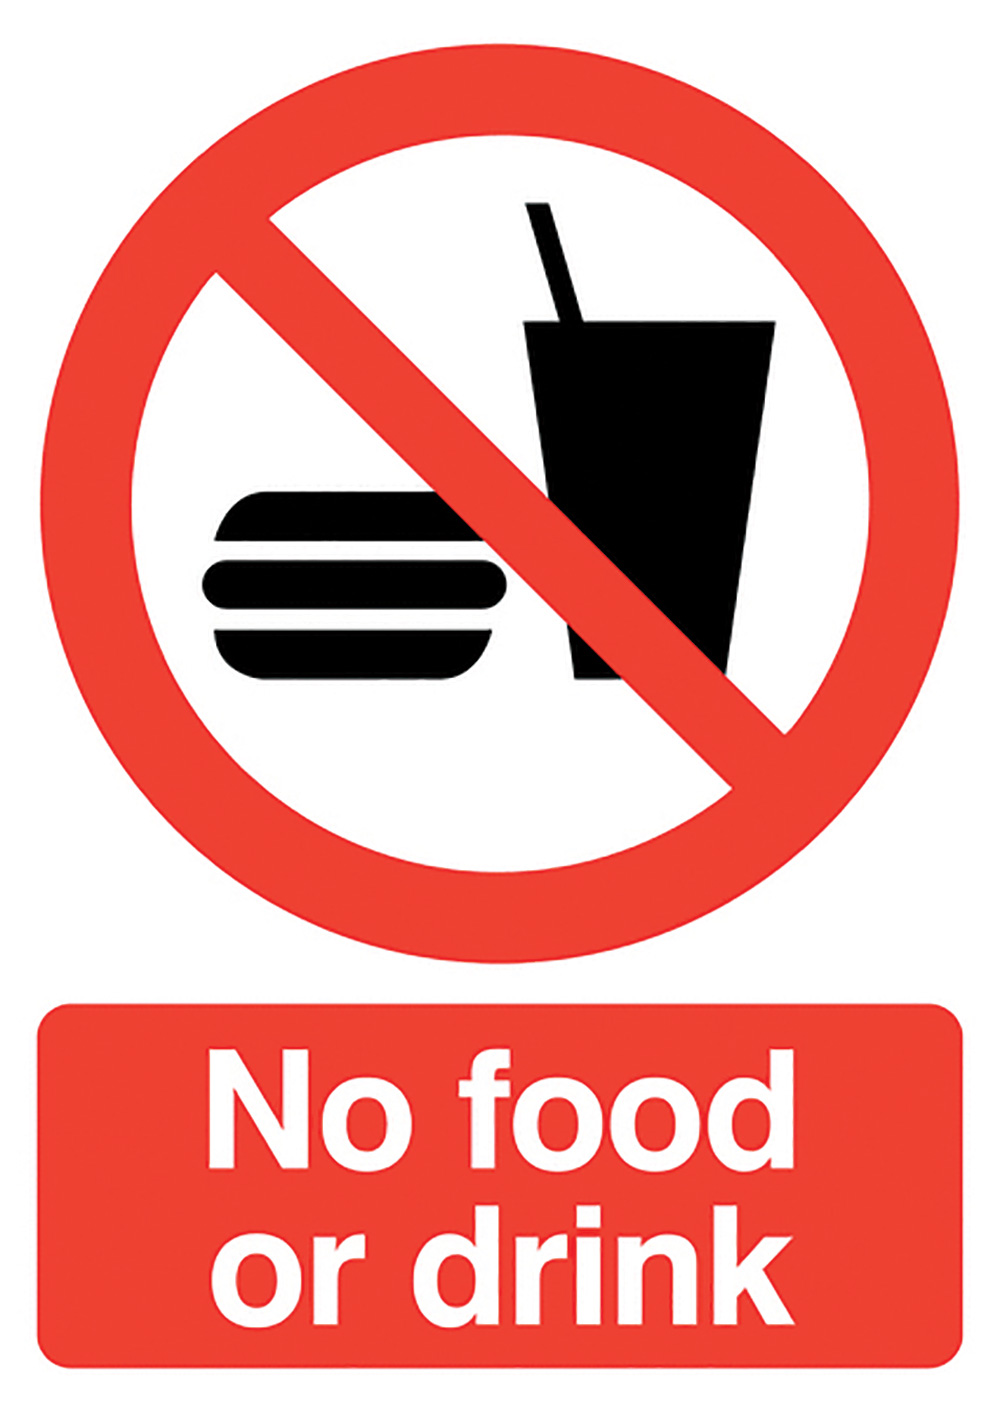 No Food or Drink  297x210mm Self Adhesive Vinyl Safety Sign  